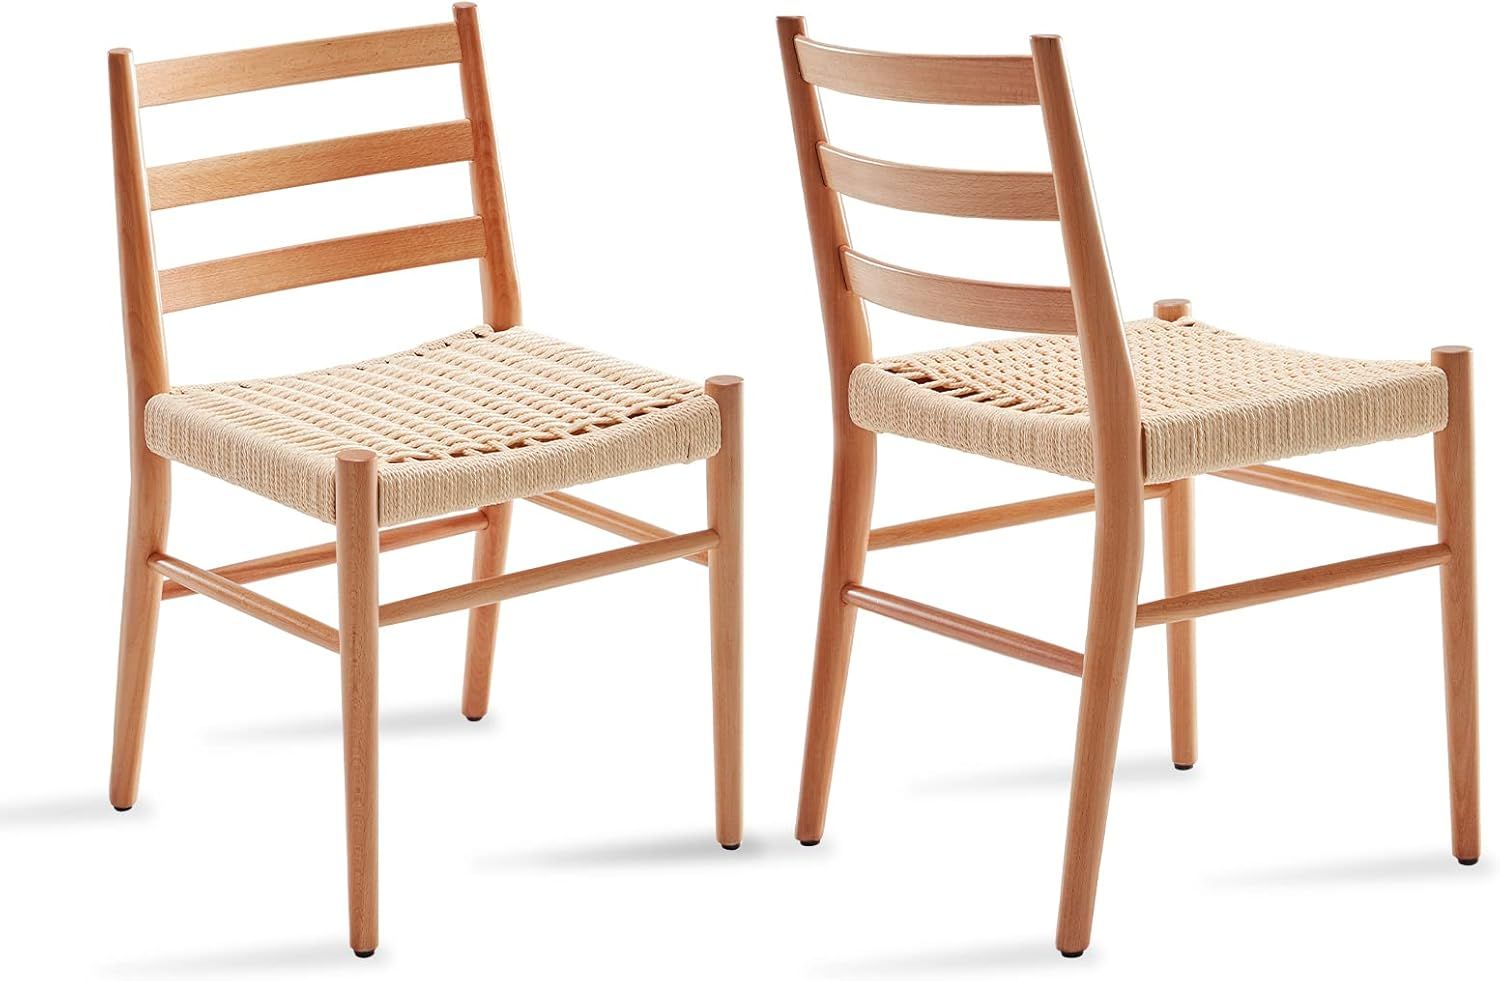 STARY Rattan Dining Room Chairs Set of 2 with Comfortable Woven Seat, Fully Assembled, Nature | Amazon (US)